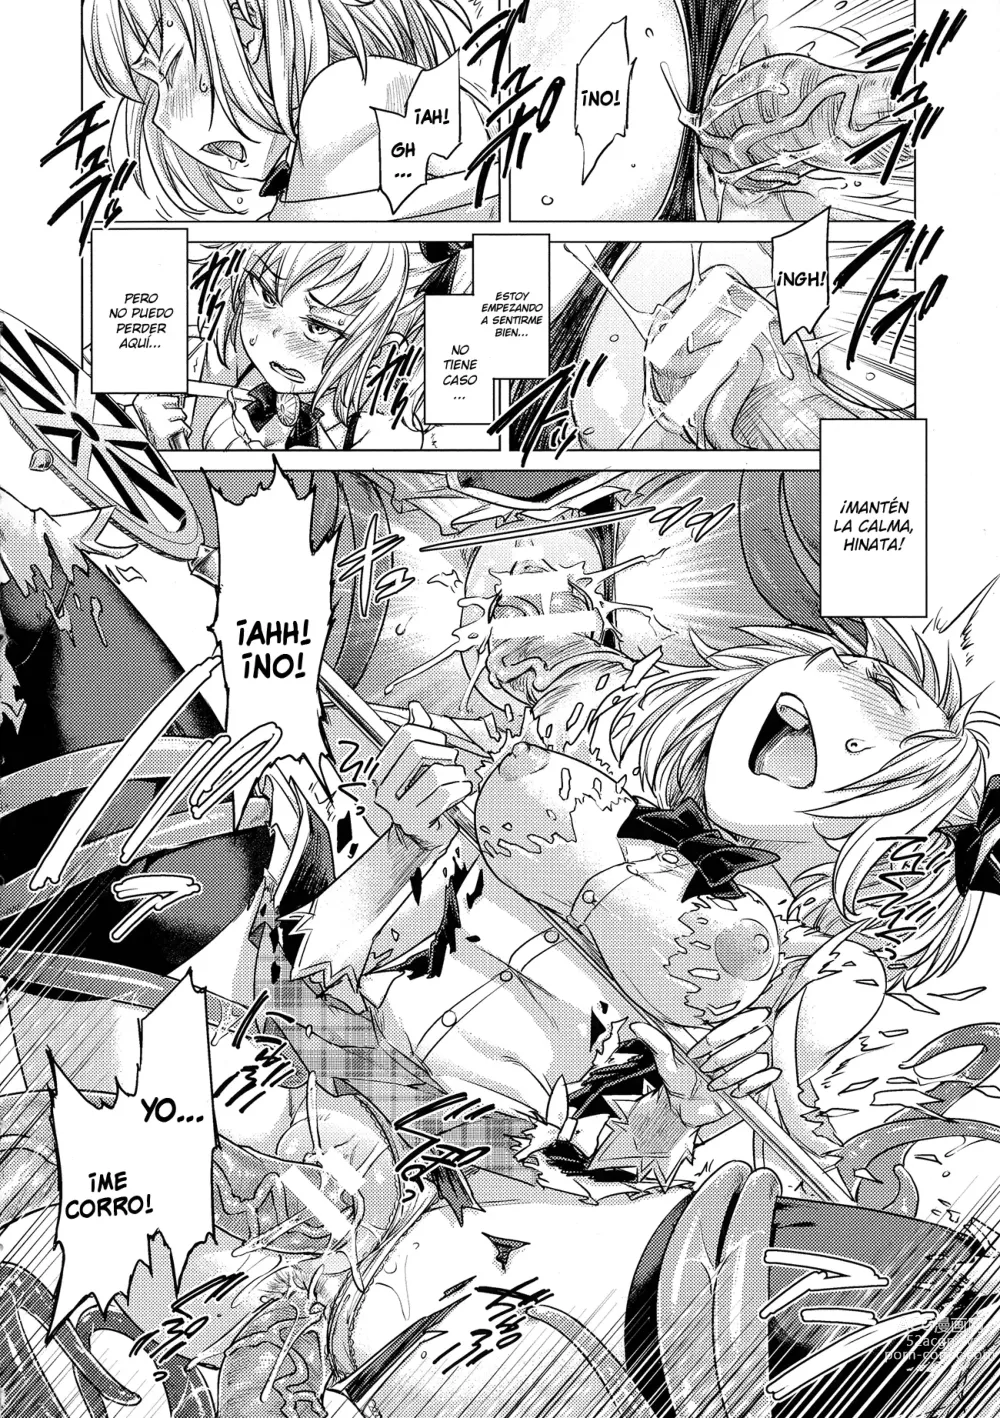 Page 6 of manga Tentacle Maiden